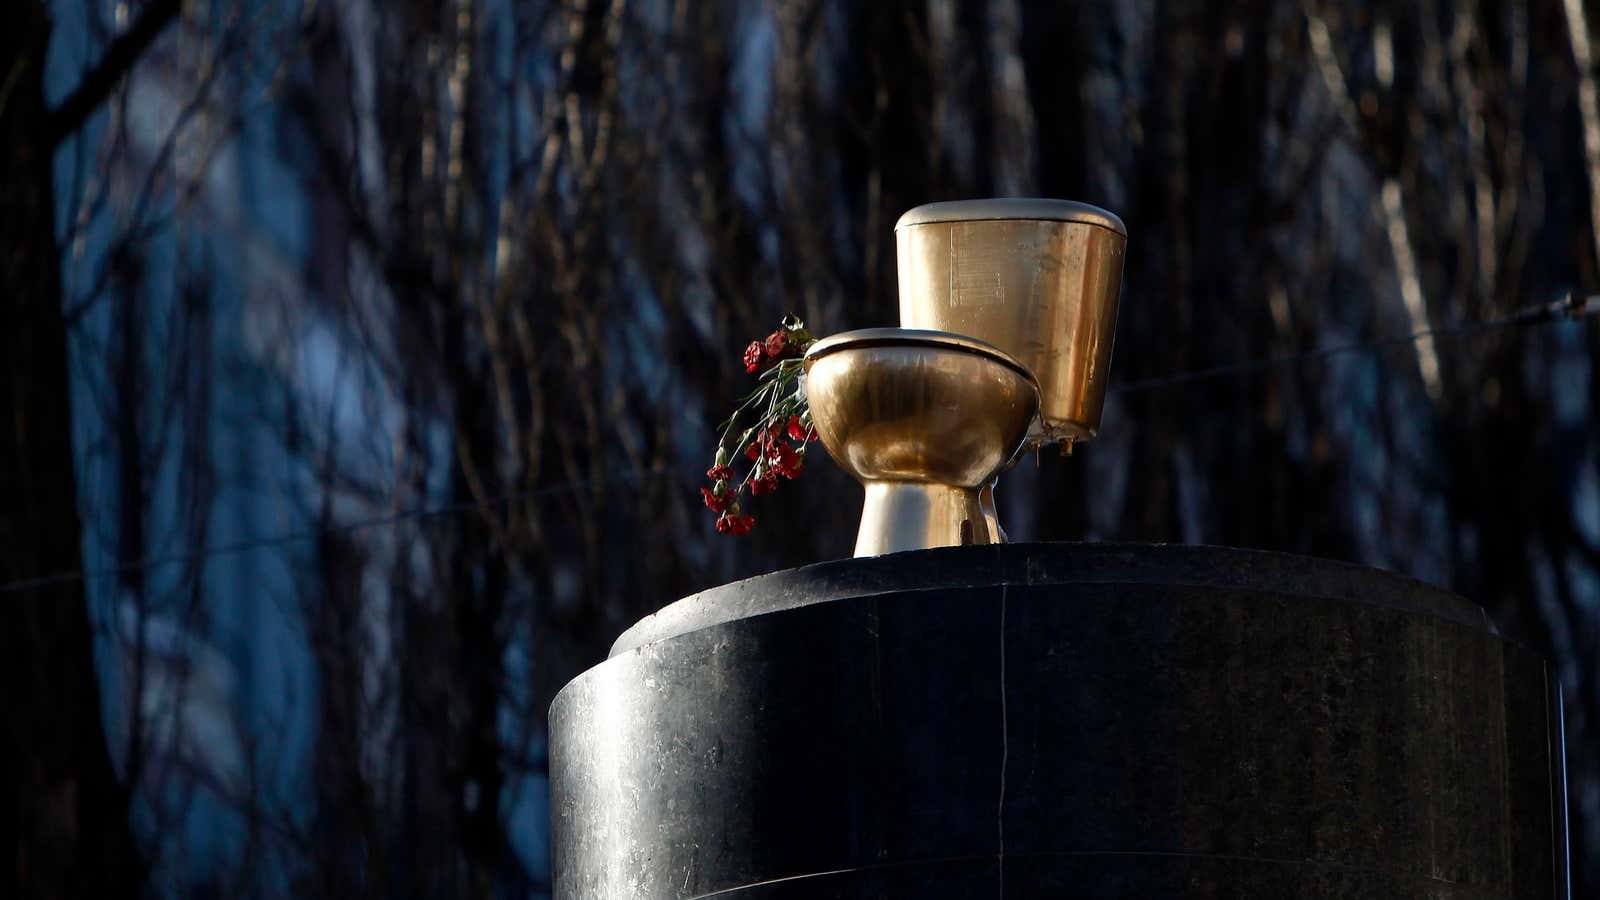 Royal flush: The toilet bowl atop Lenin’s statue in Kiev is but one measure of success.